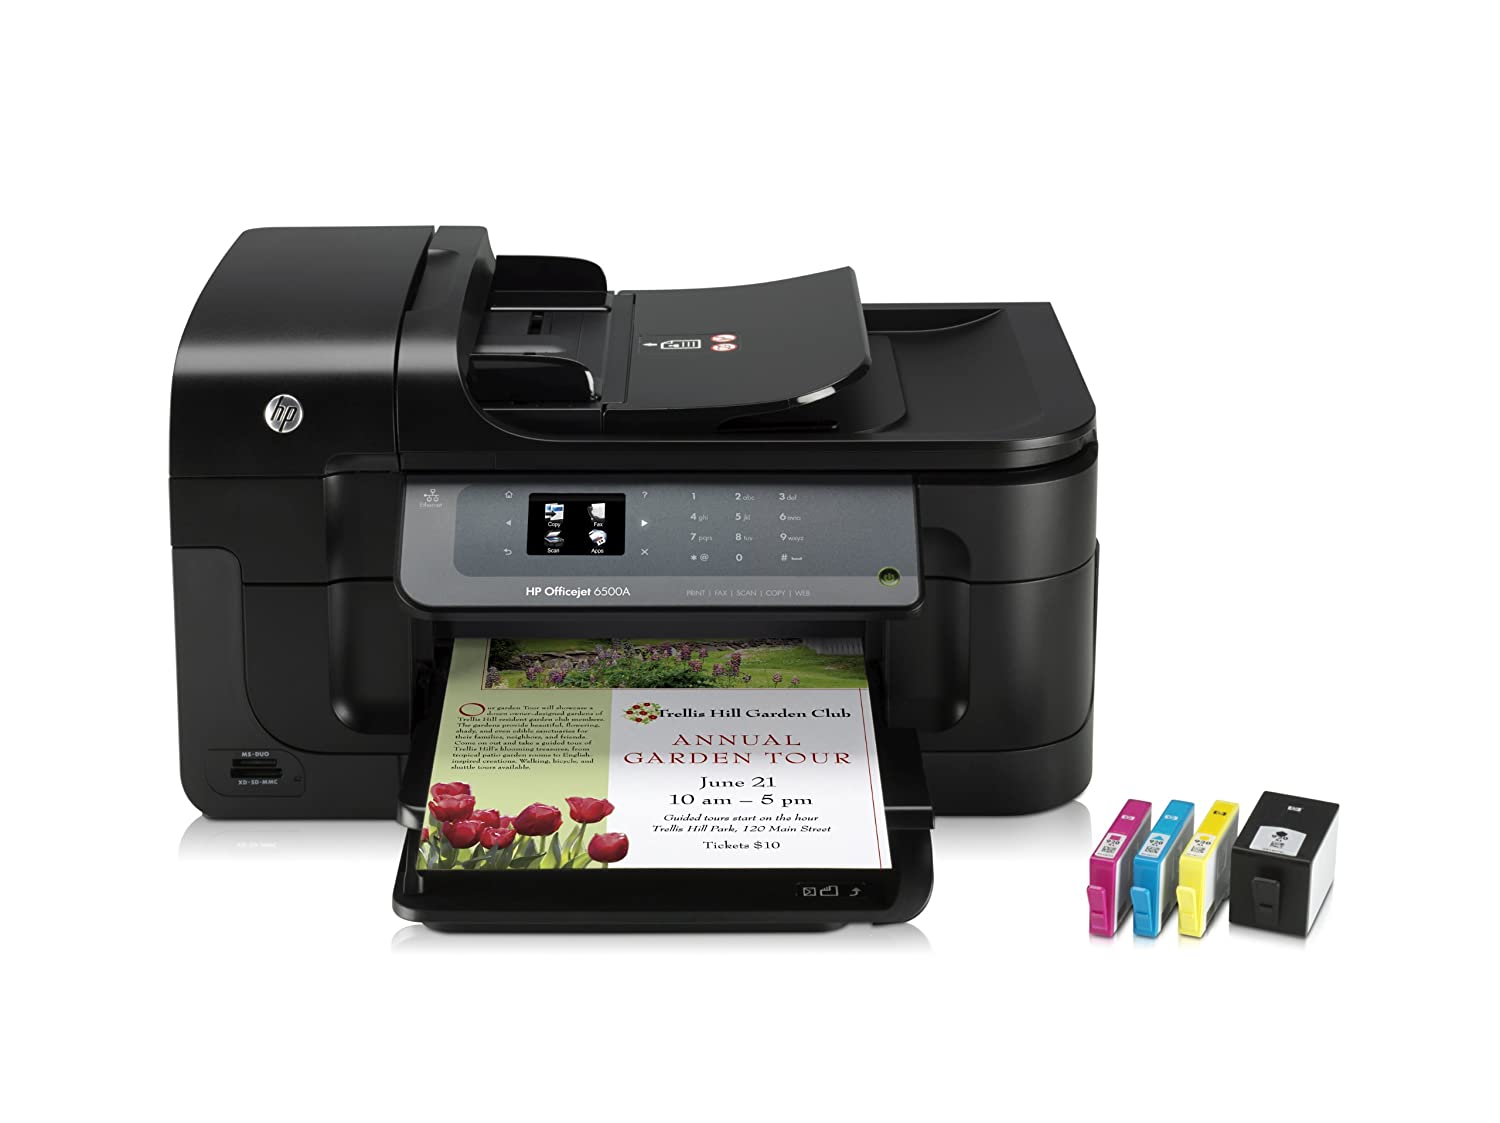 hp officejet 6500a plus driver download